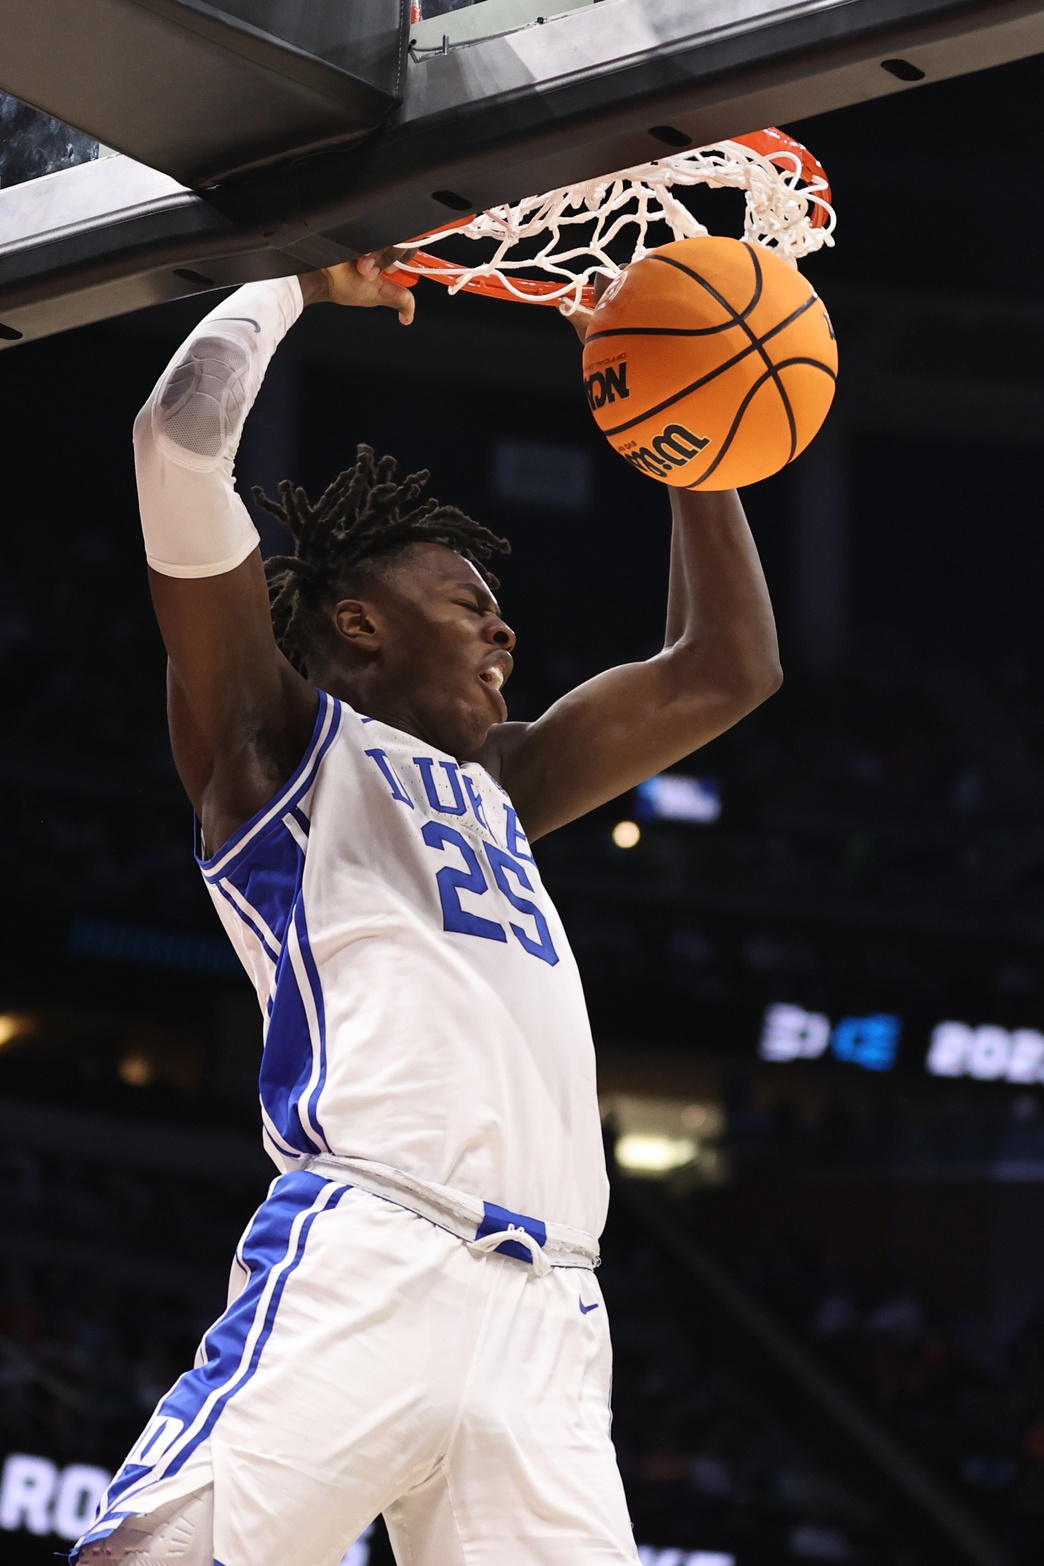 Mar 16, 2023; Orlando, FL, USA; Duke Blue Devils forward Mark Mitchell (25) dunks the ball during the first half against the Oral Roberts Golden Eagles at Amway Center. Mandatory Credit: Matt Pendleton-USA TODAY Sports